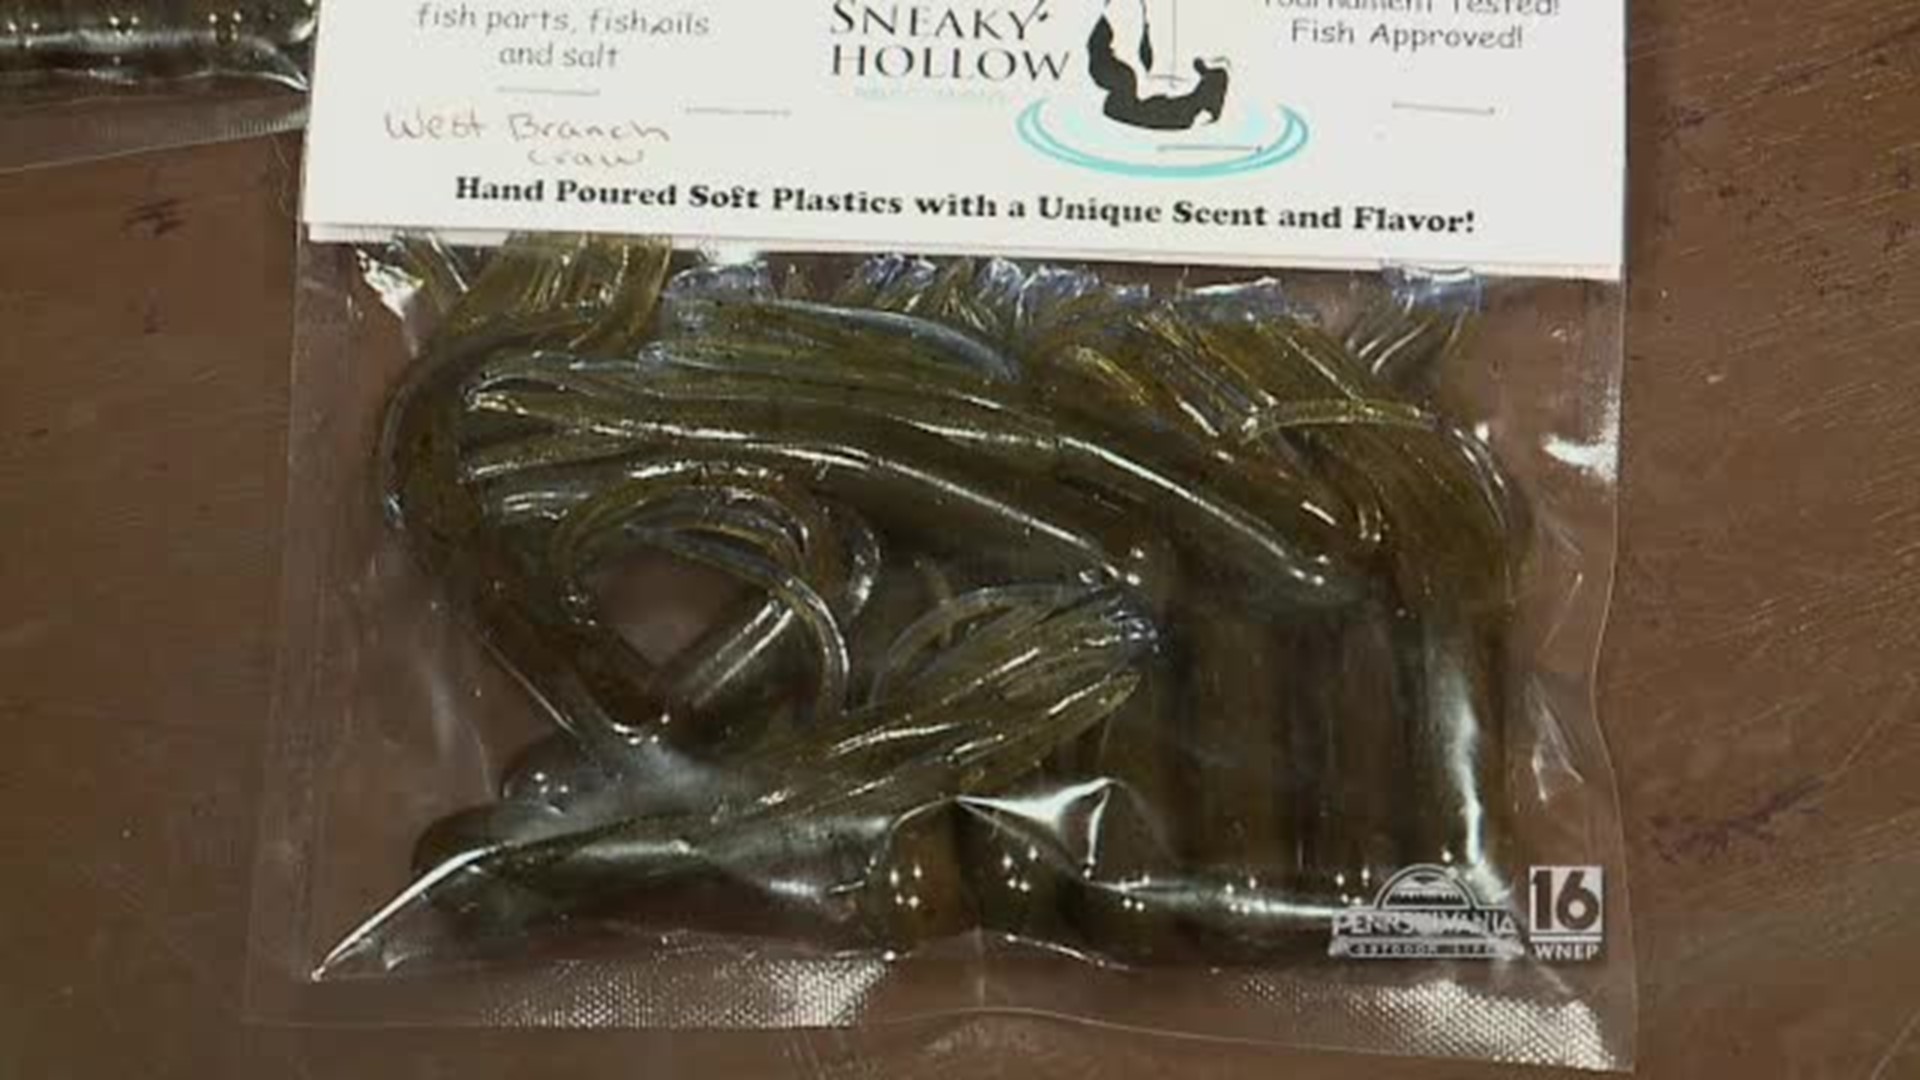 Sneaky Hollow Bait Company Product Giveaway